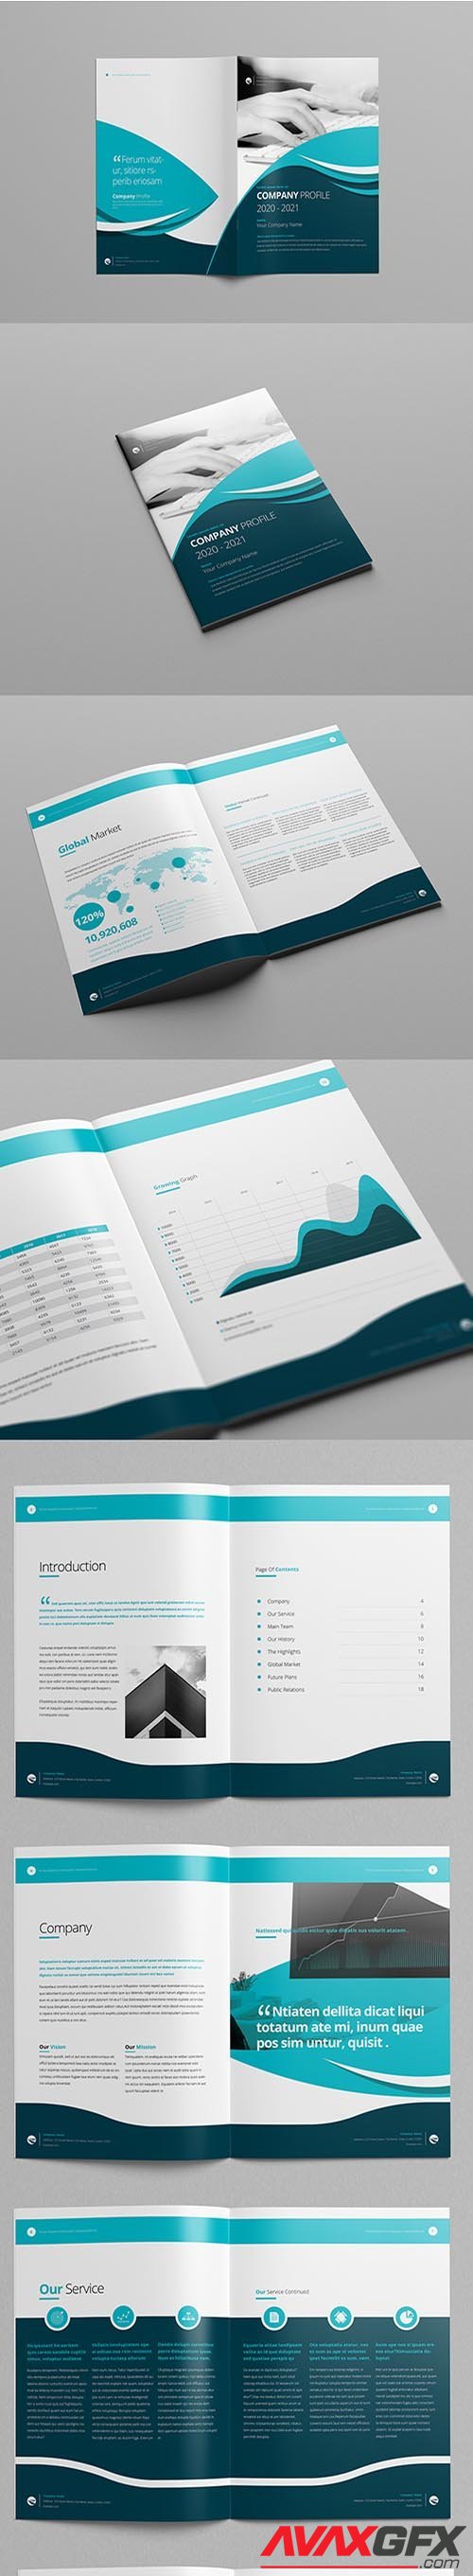 Company Profile Layout with Teal and Blue Accents 220149458